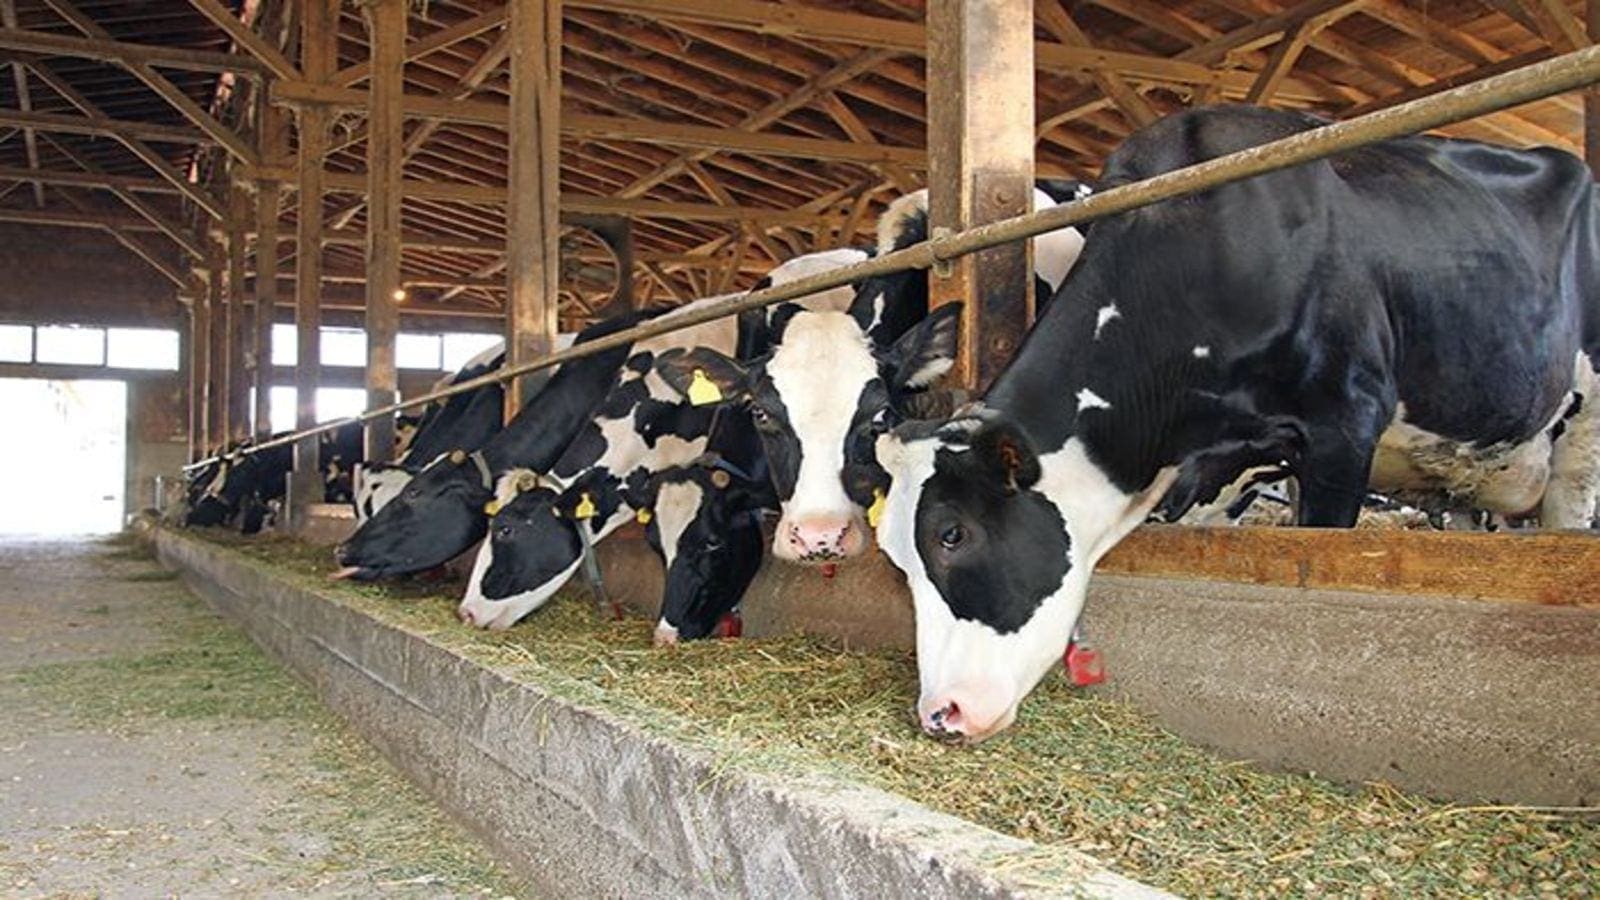 Nigeria’s annual US$1.5B expenditure on dairy product imports unsustainable, NABDA Chief warns